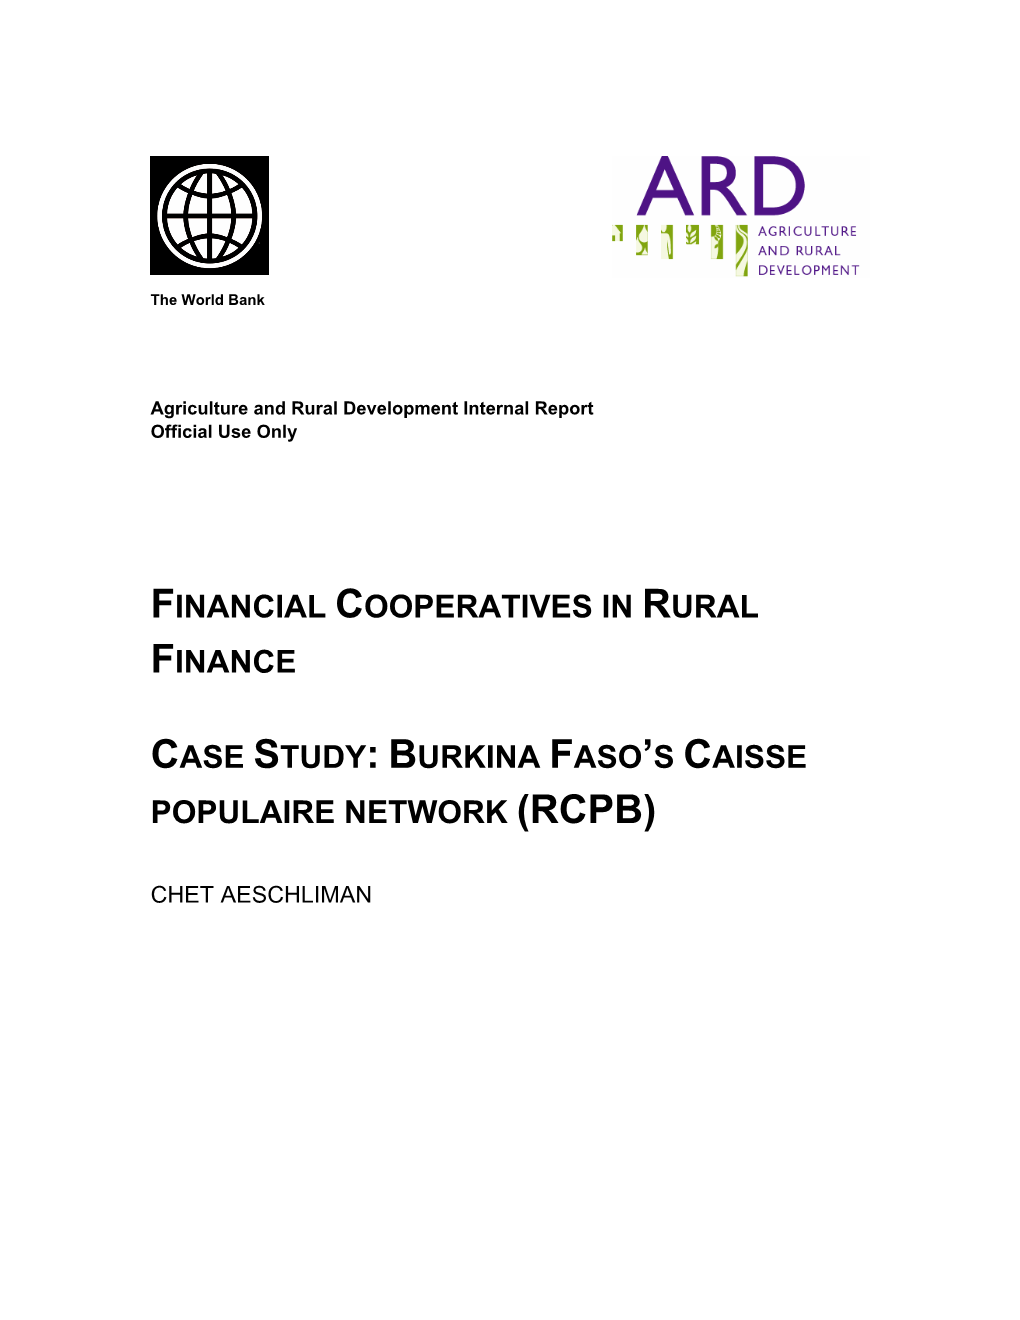 Burkina Faso’S Caisse Populaire Network (Rcpb)